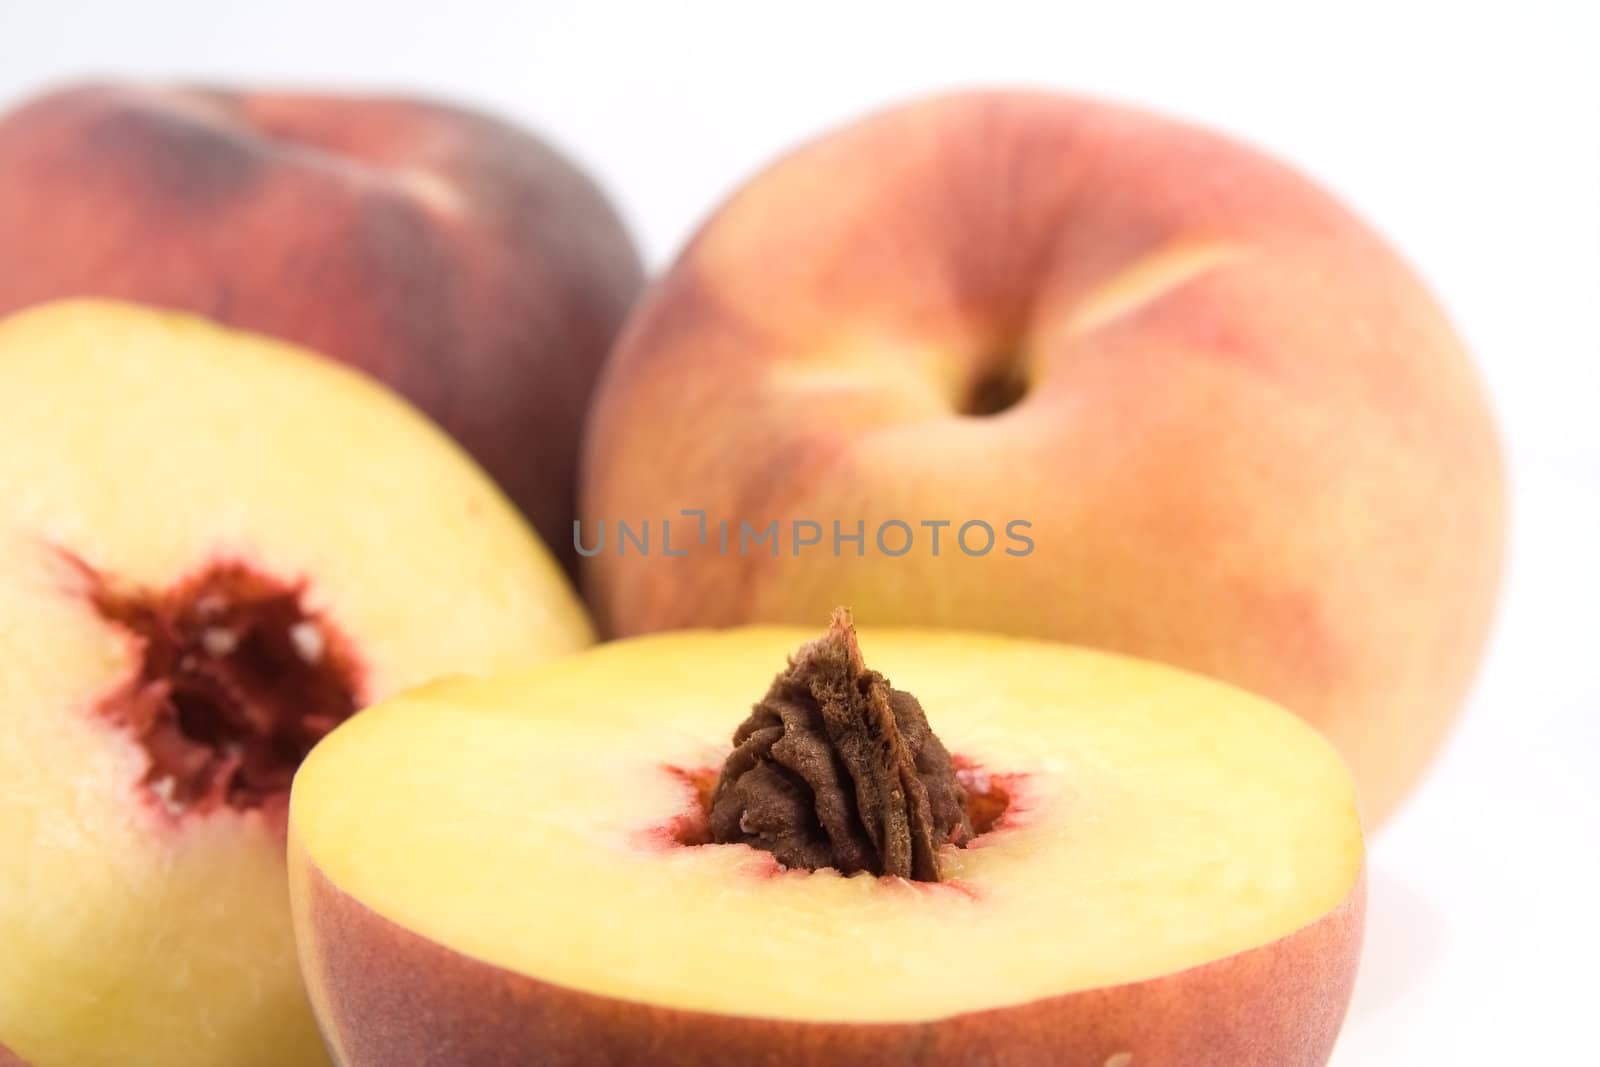 Peach with seed foreground. Shalow depth of field with focus on pit.